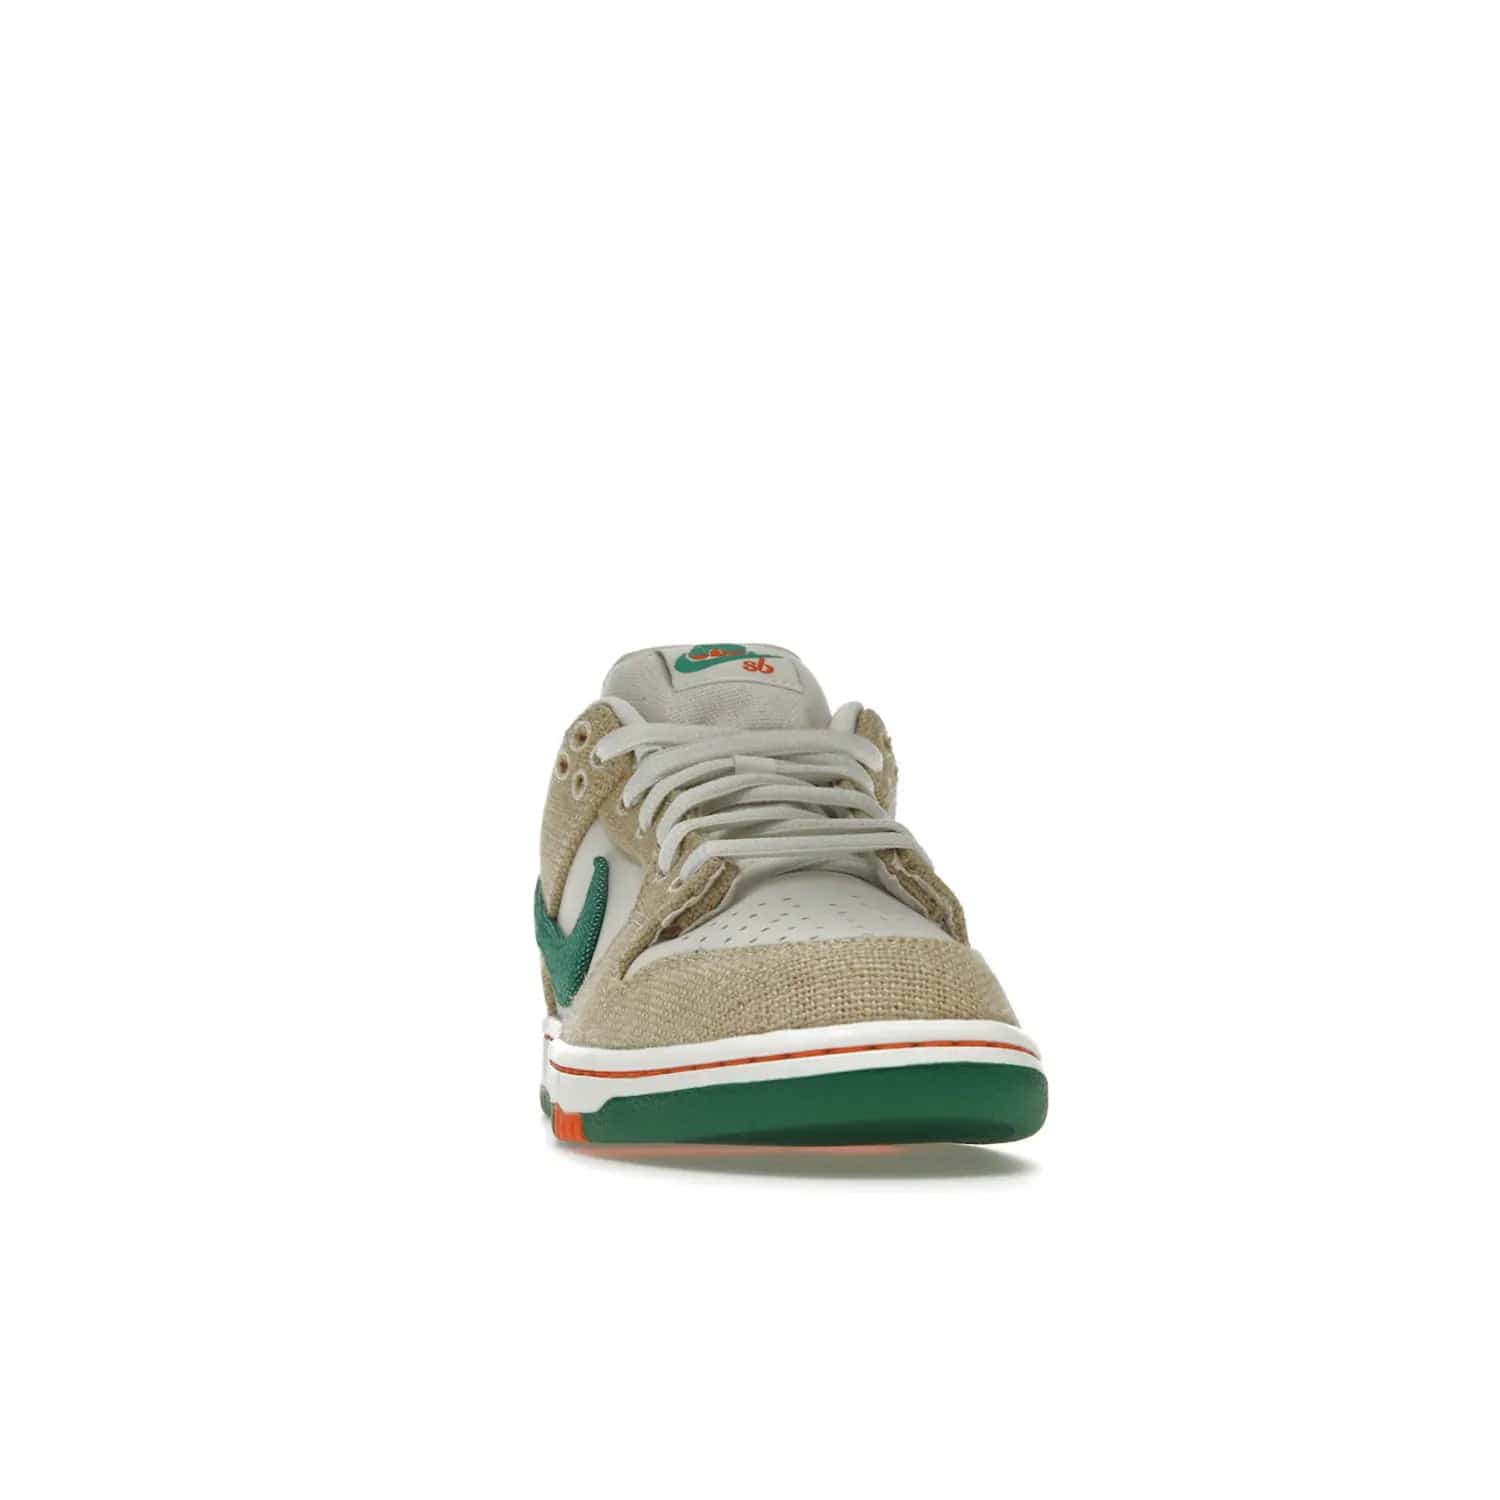 Nike SB Dunk Low Jarritos - Image 9 - Only at www.BallersClubKickz.com - Shop limited edition Nike SB Dunk Low Jarritos! Crafted with white leather and tear-away canvas materials with green accents. Includes orange, green, and white laces to customize your look. Available now.